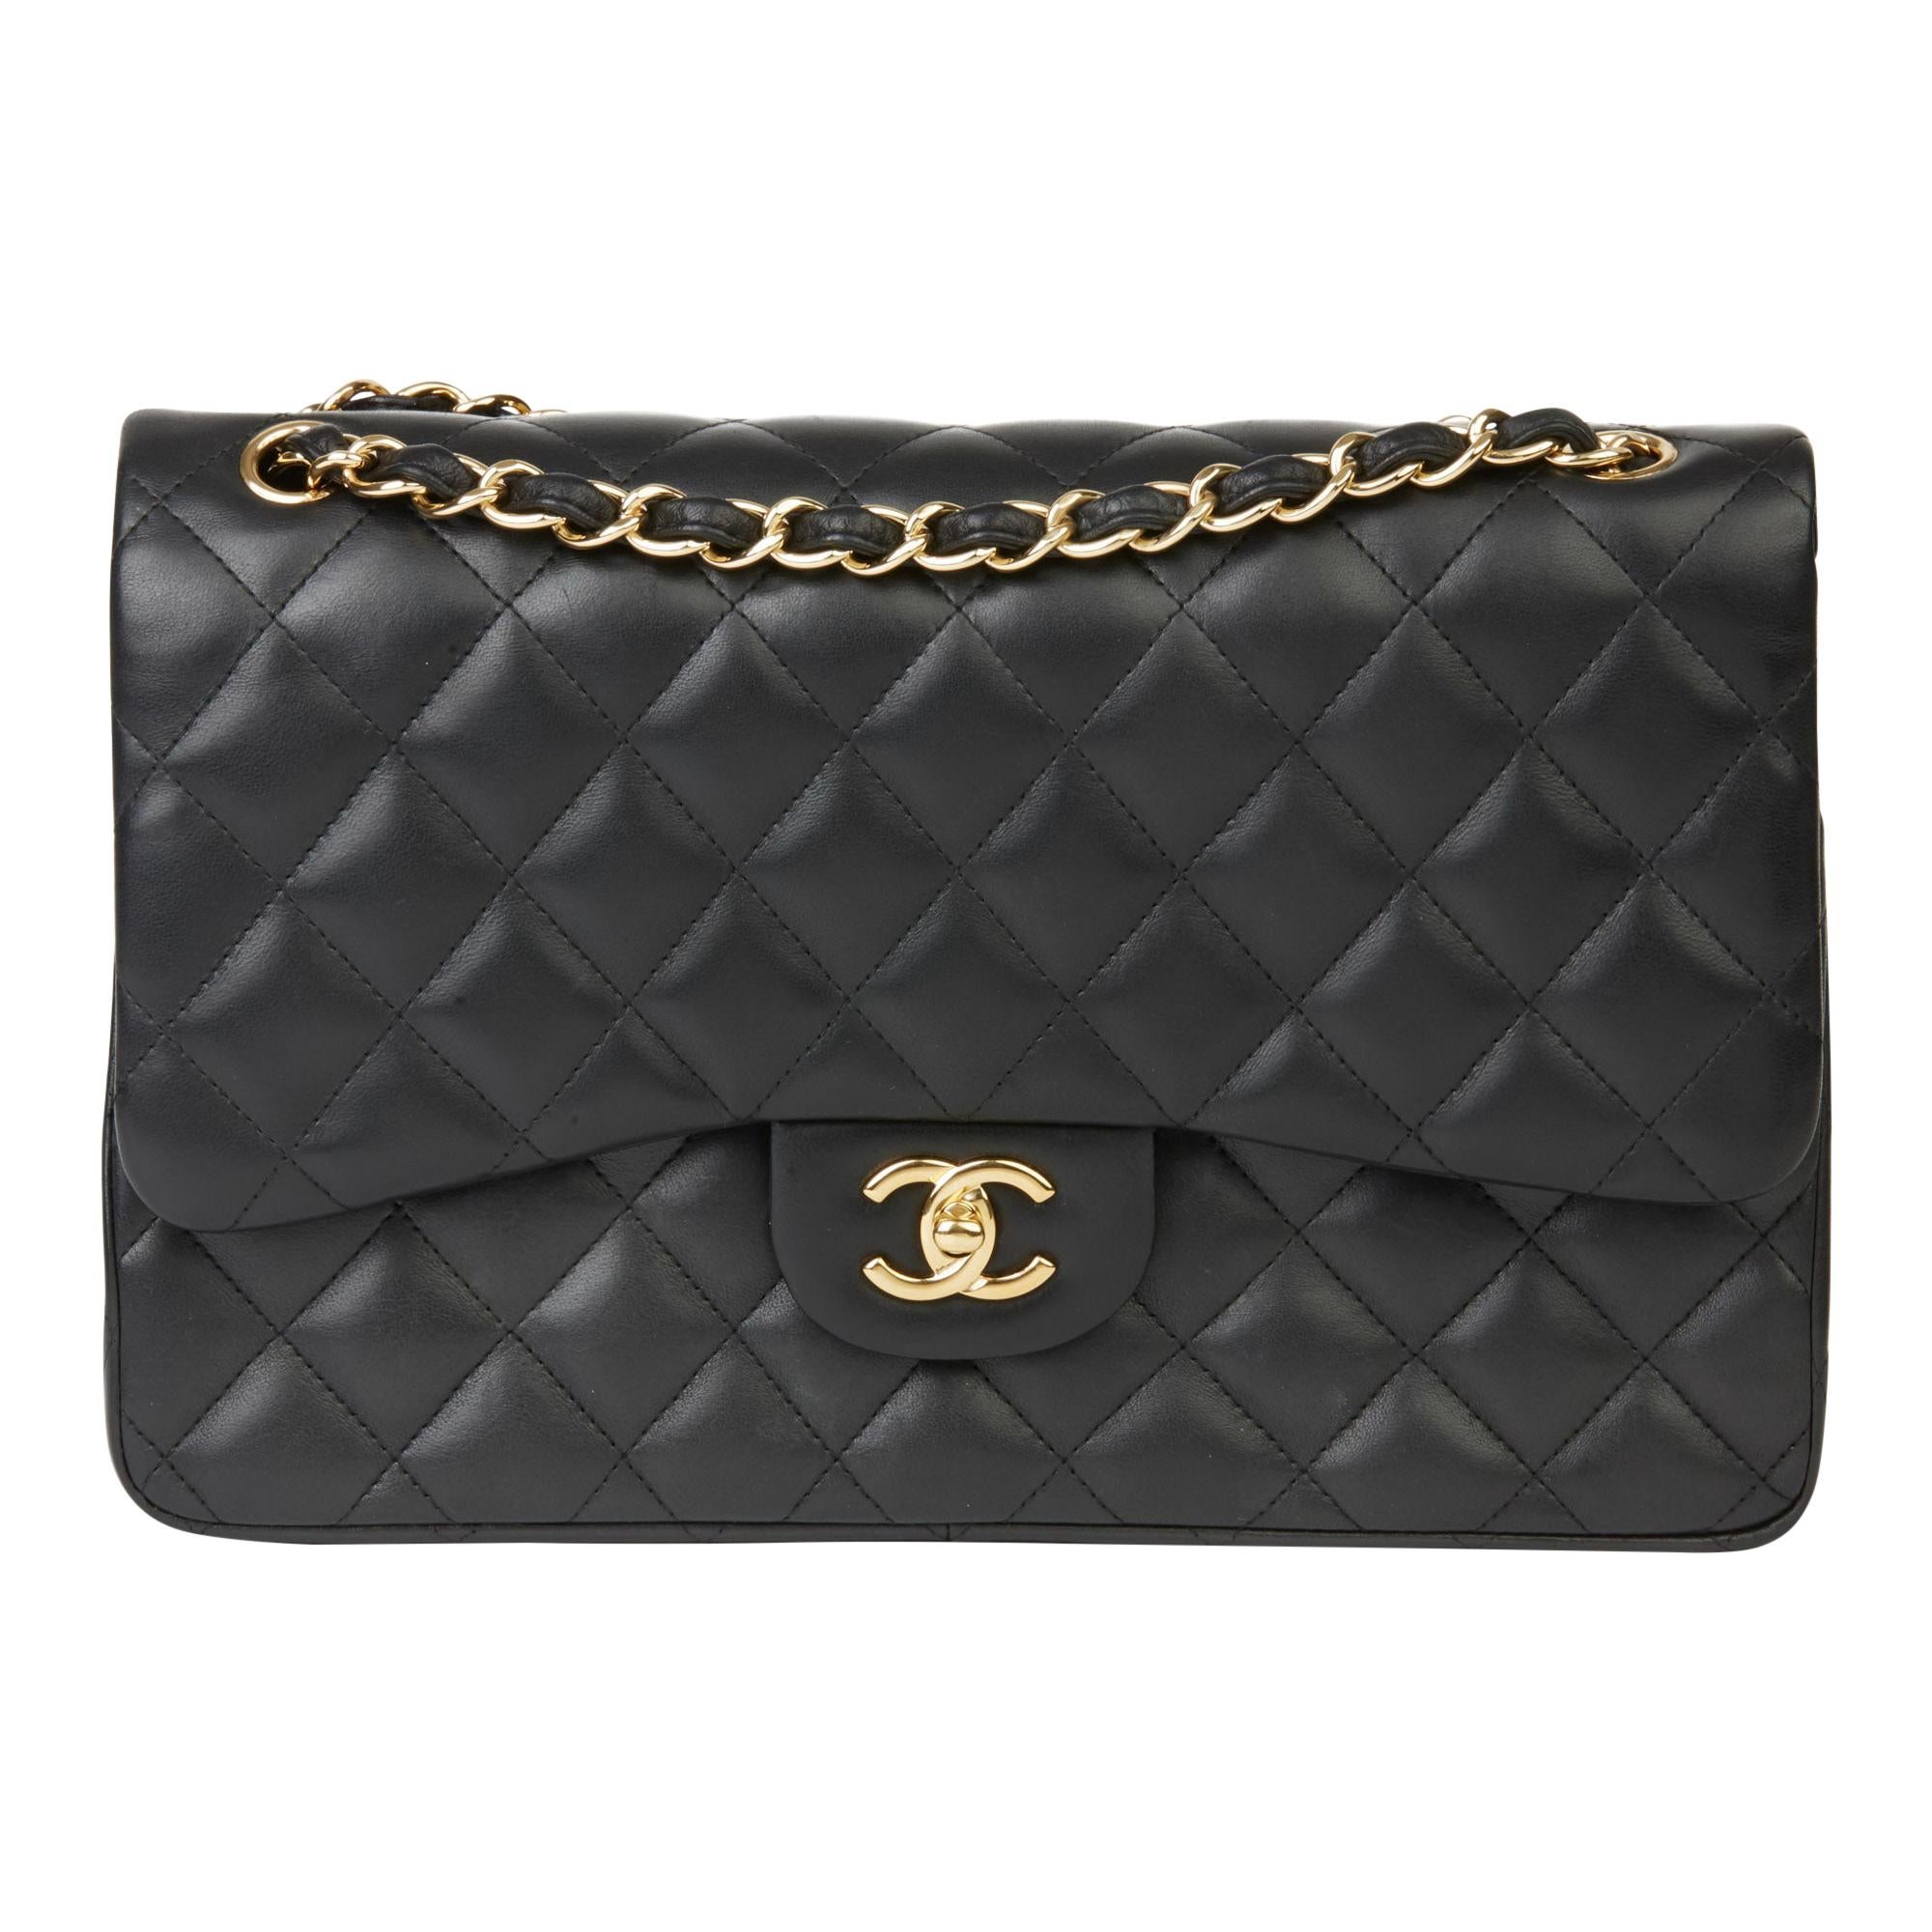 2011 Chanel Black Quilted Lambskin Jumbo Classic Double Flap